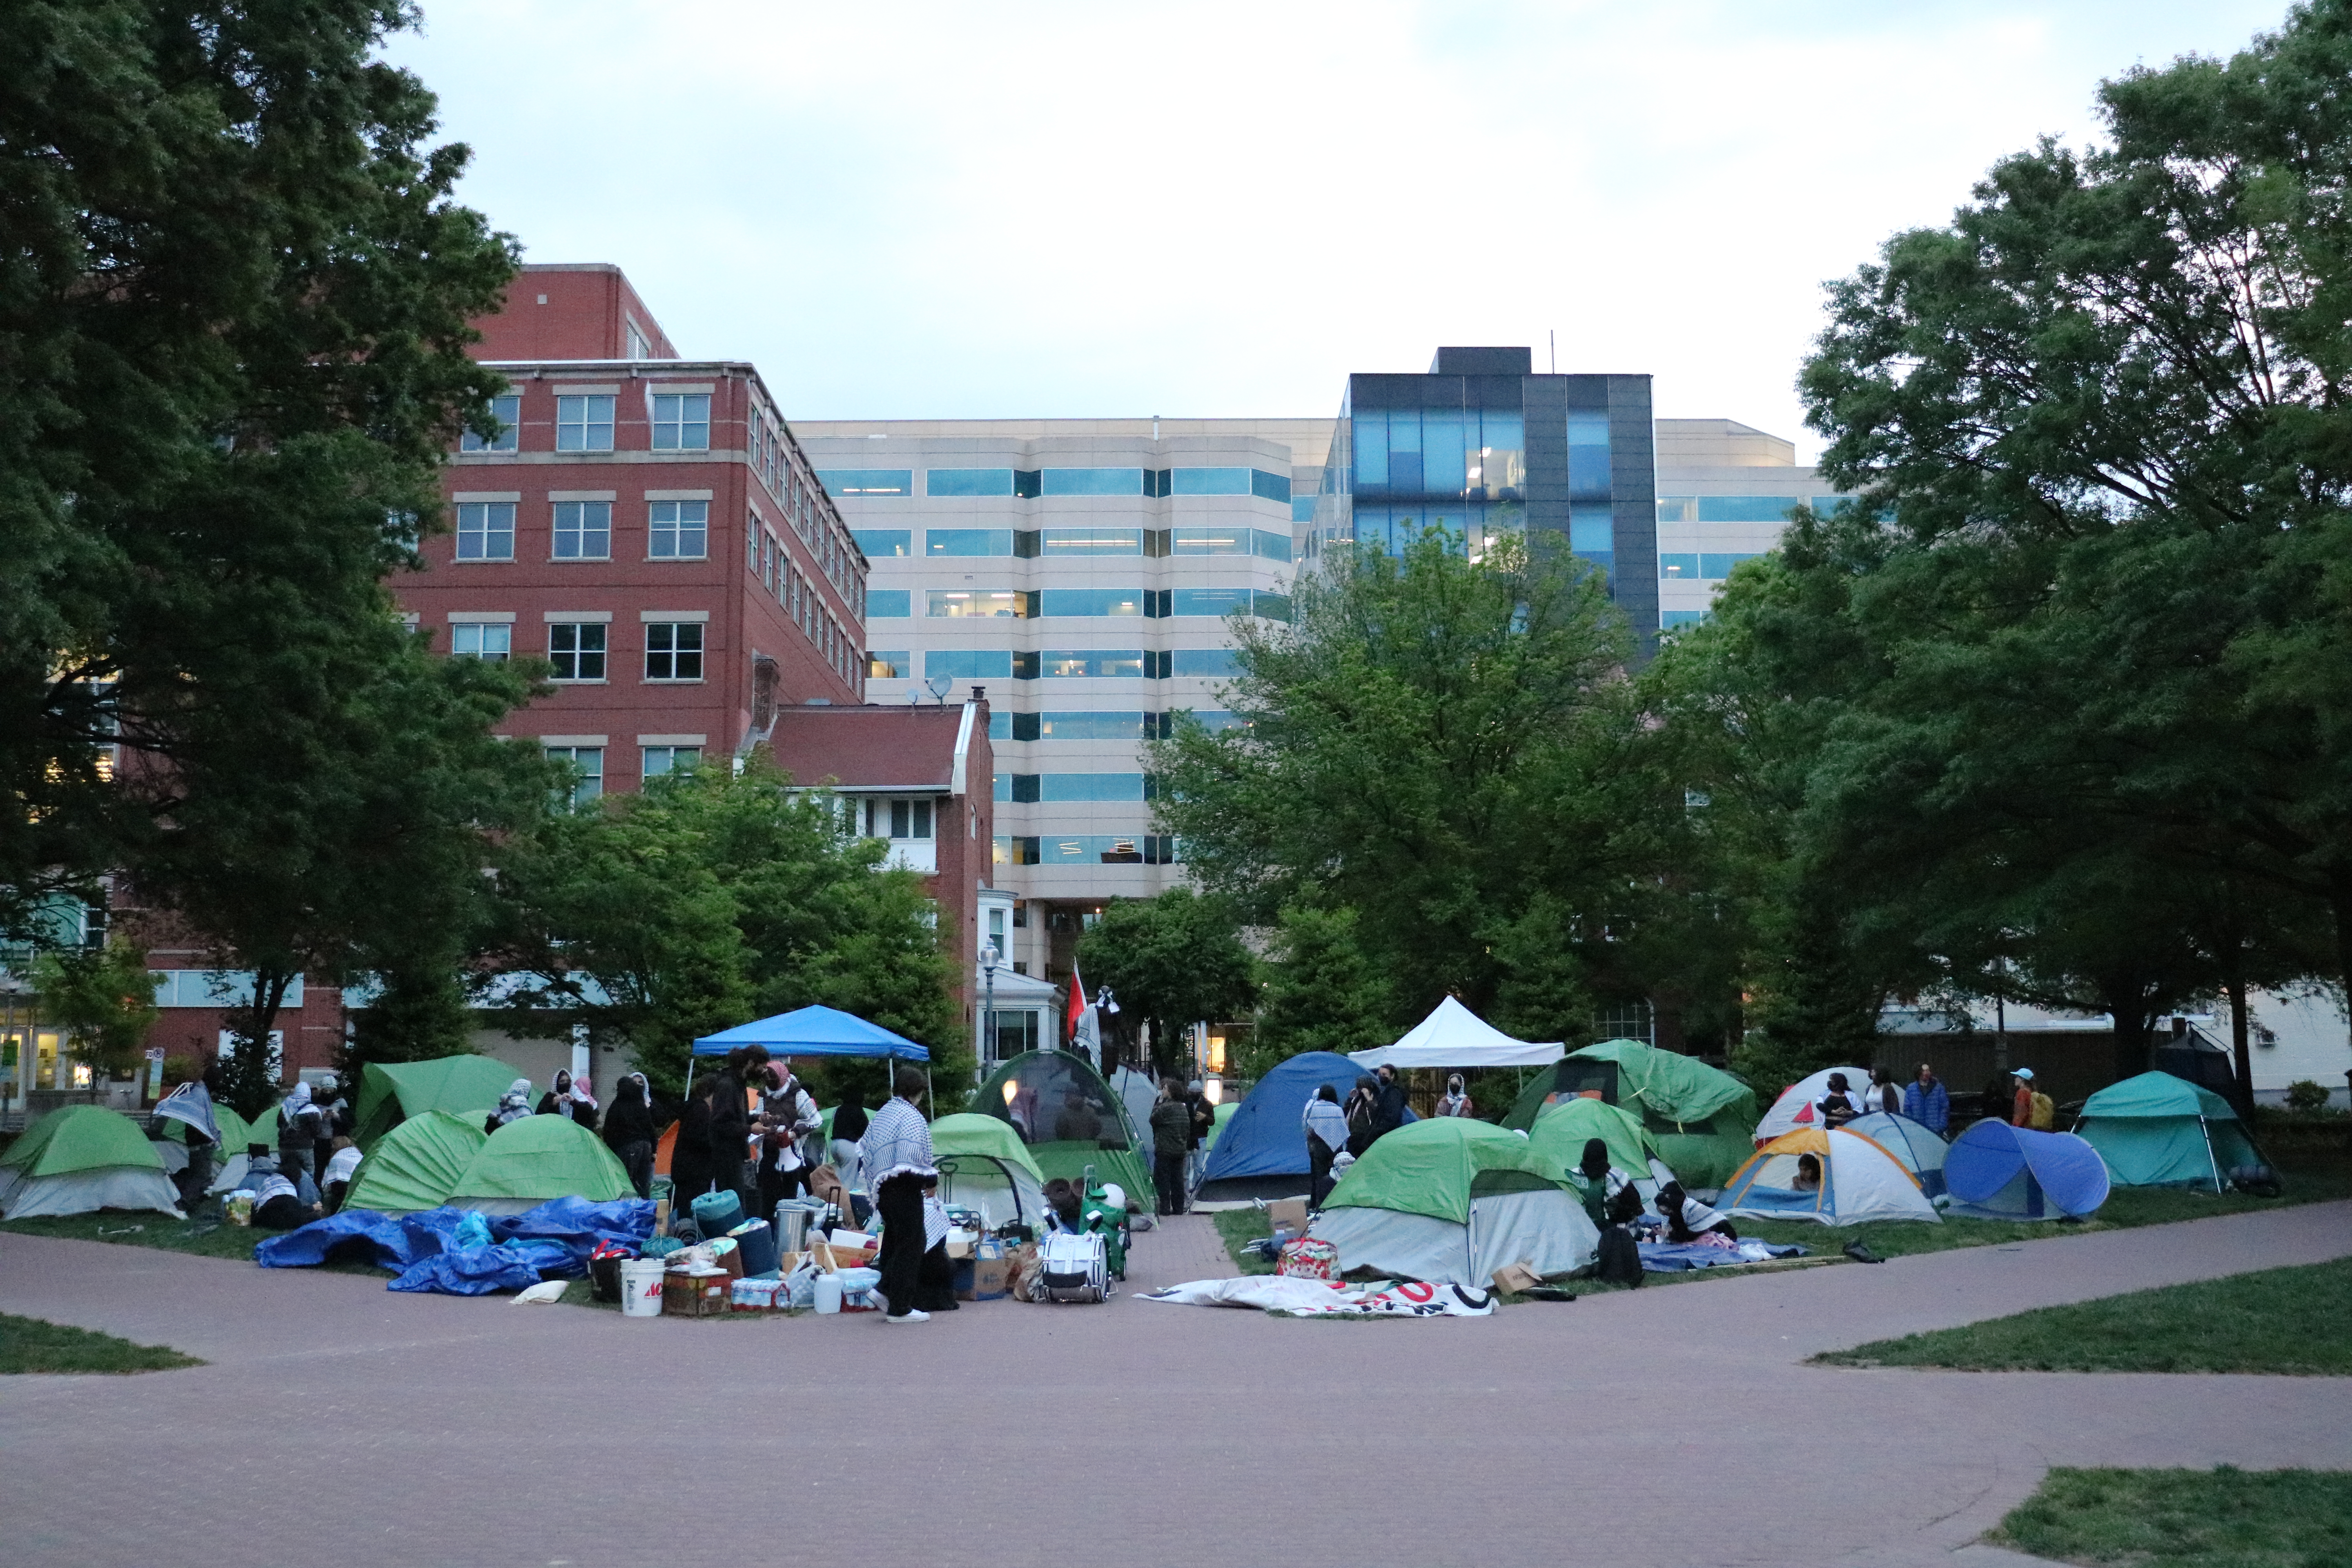 The sun rises at GW as student protesters finish setting up the tent encampment.